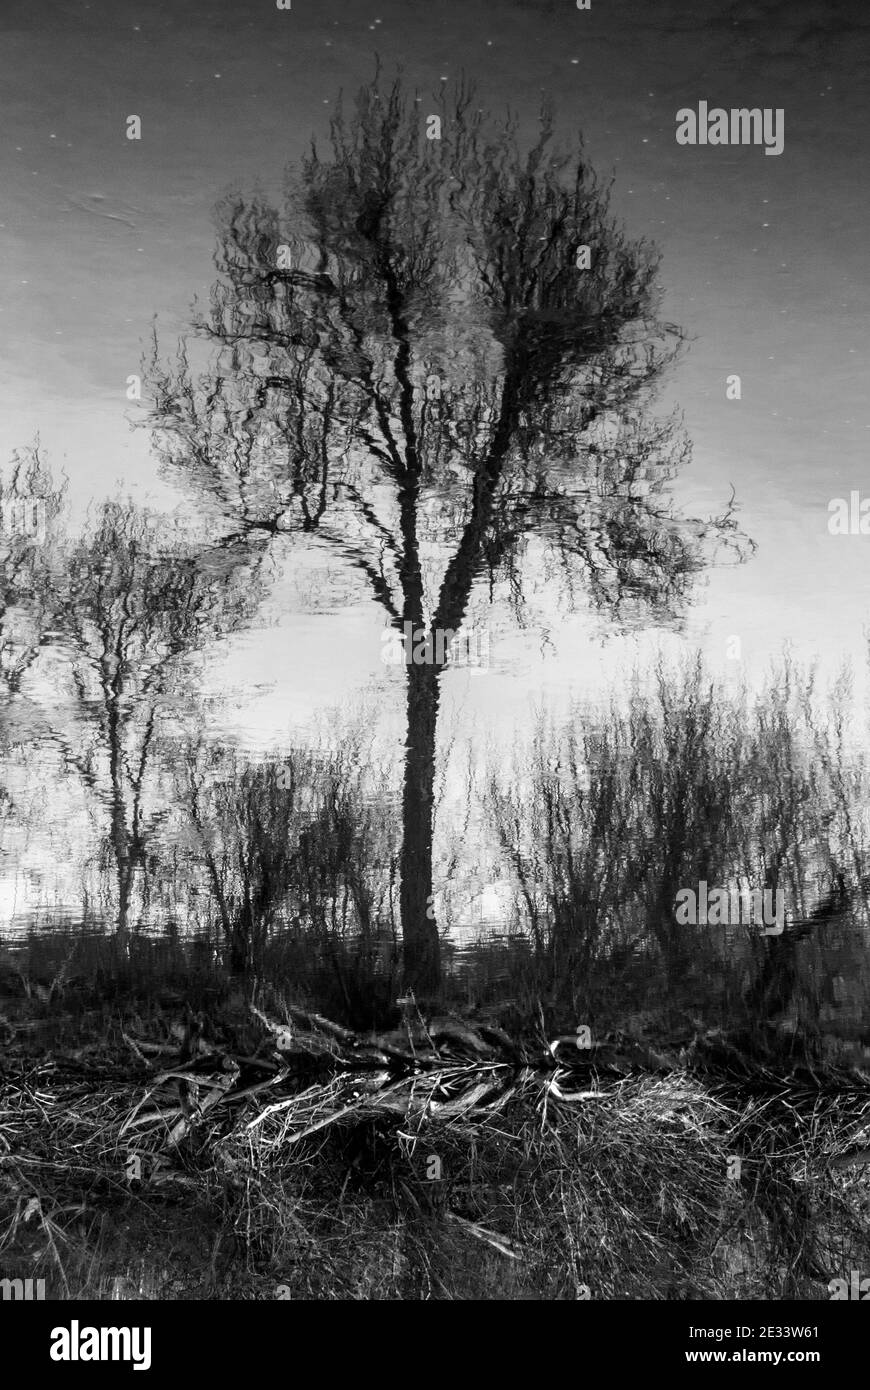 Inverted reflection of a cottonwood tree and what appears to be a starry night. Stock Photo